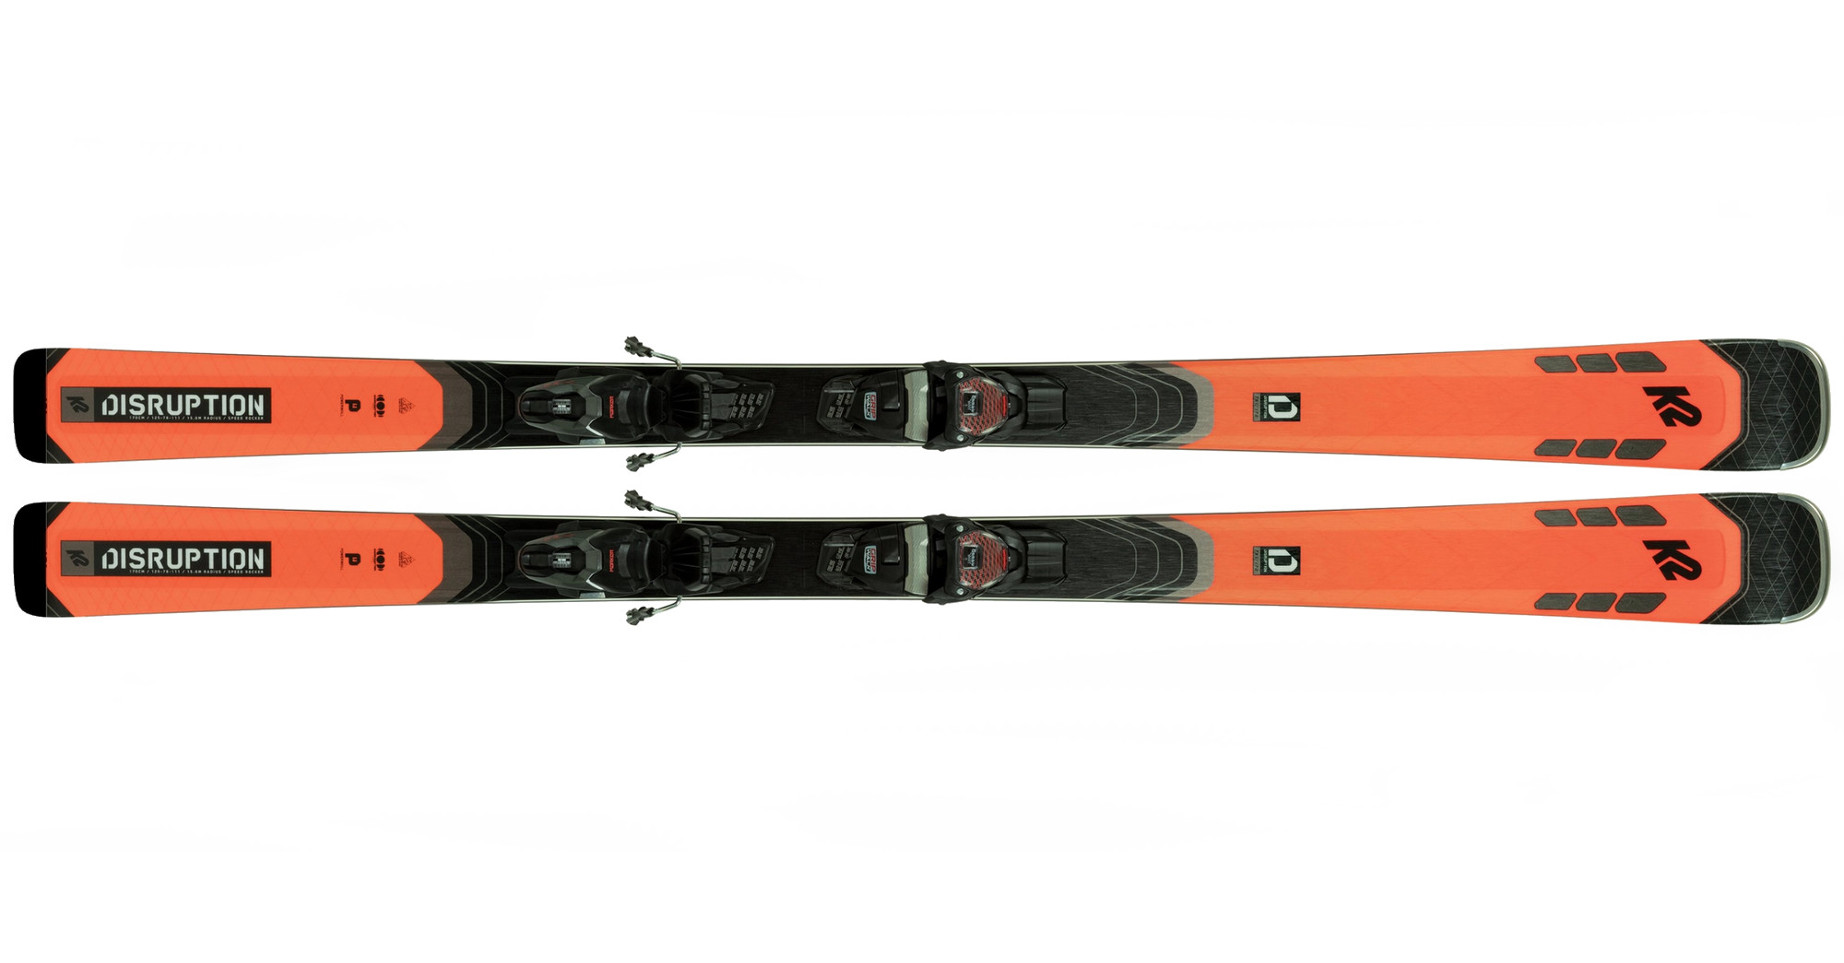 pair of K2 black and neon green downhill Skis